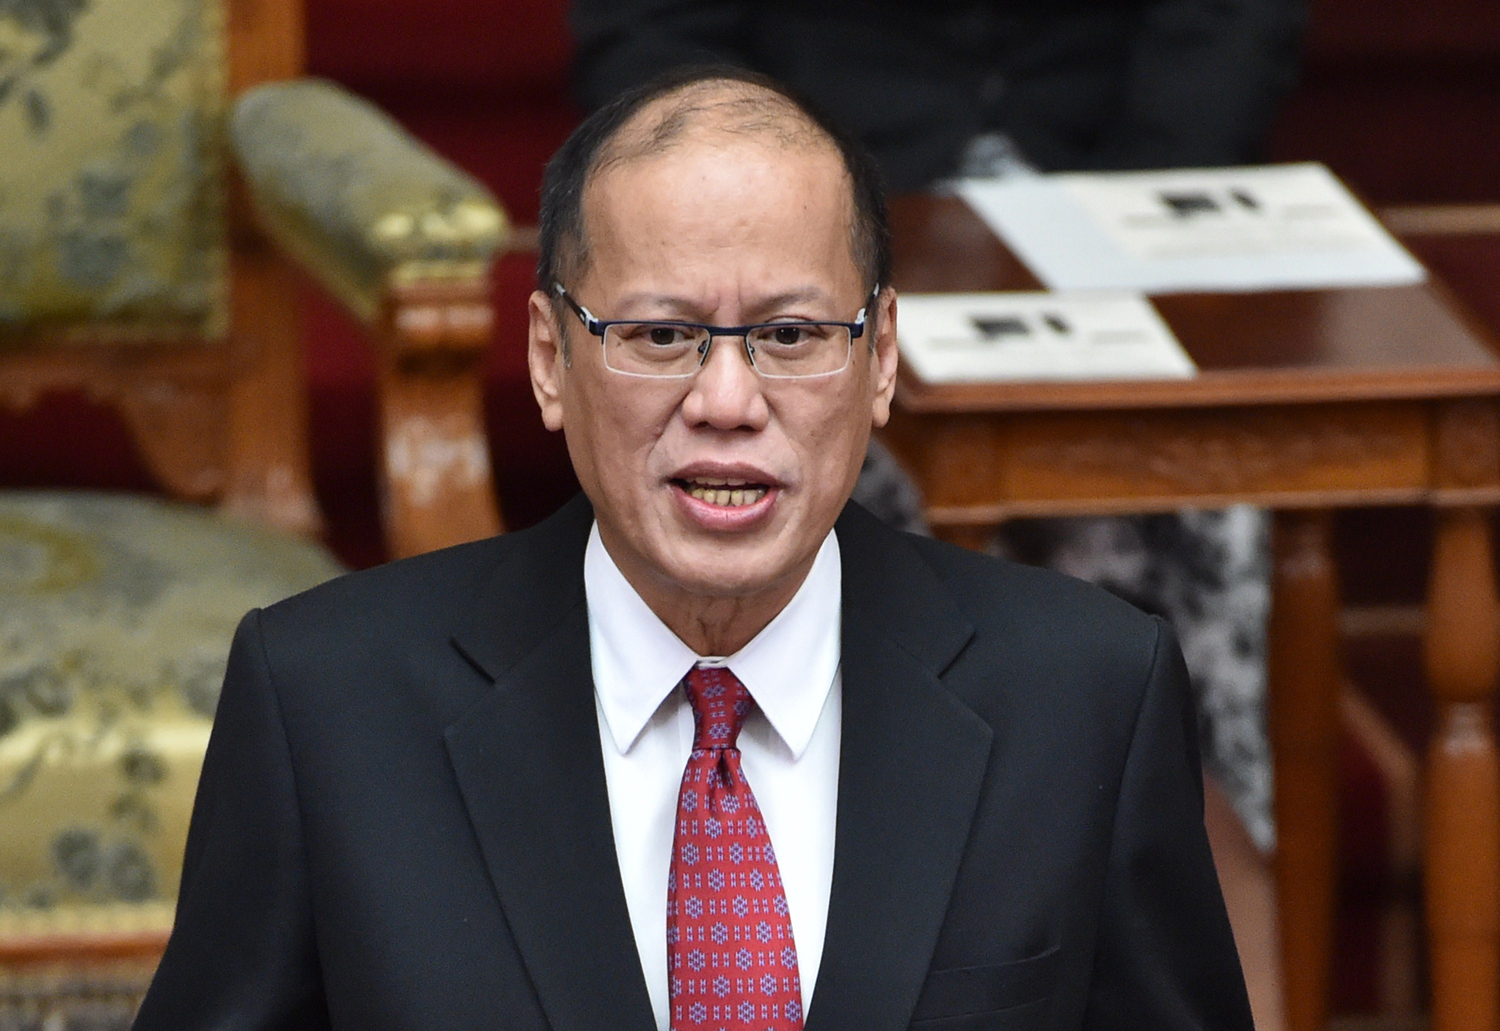 Philippine President Benigno Aquino delivers a speech in the Japanese parliament during his visit to Tokyo on June 3, 2015. (Kazuhiro Nogi — AFP/Getty Images)